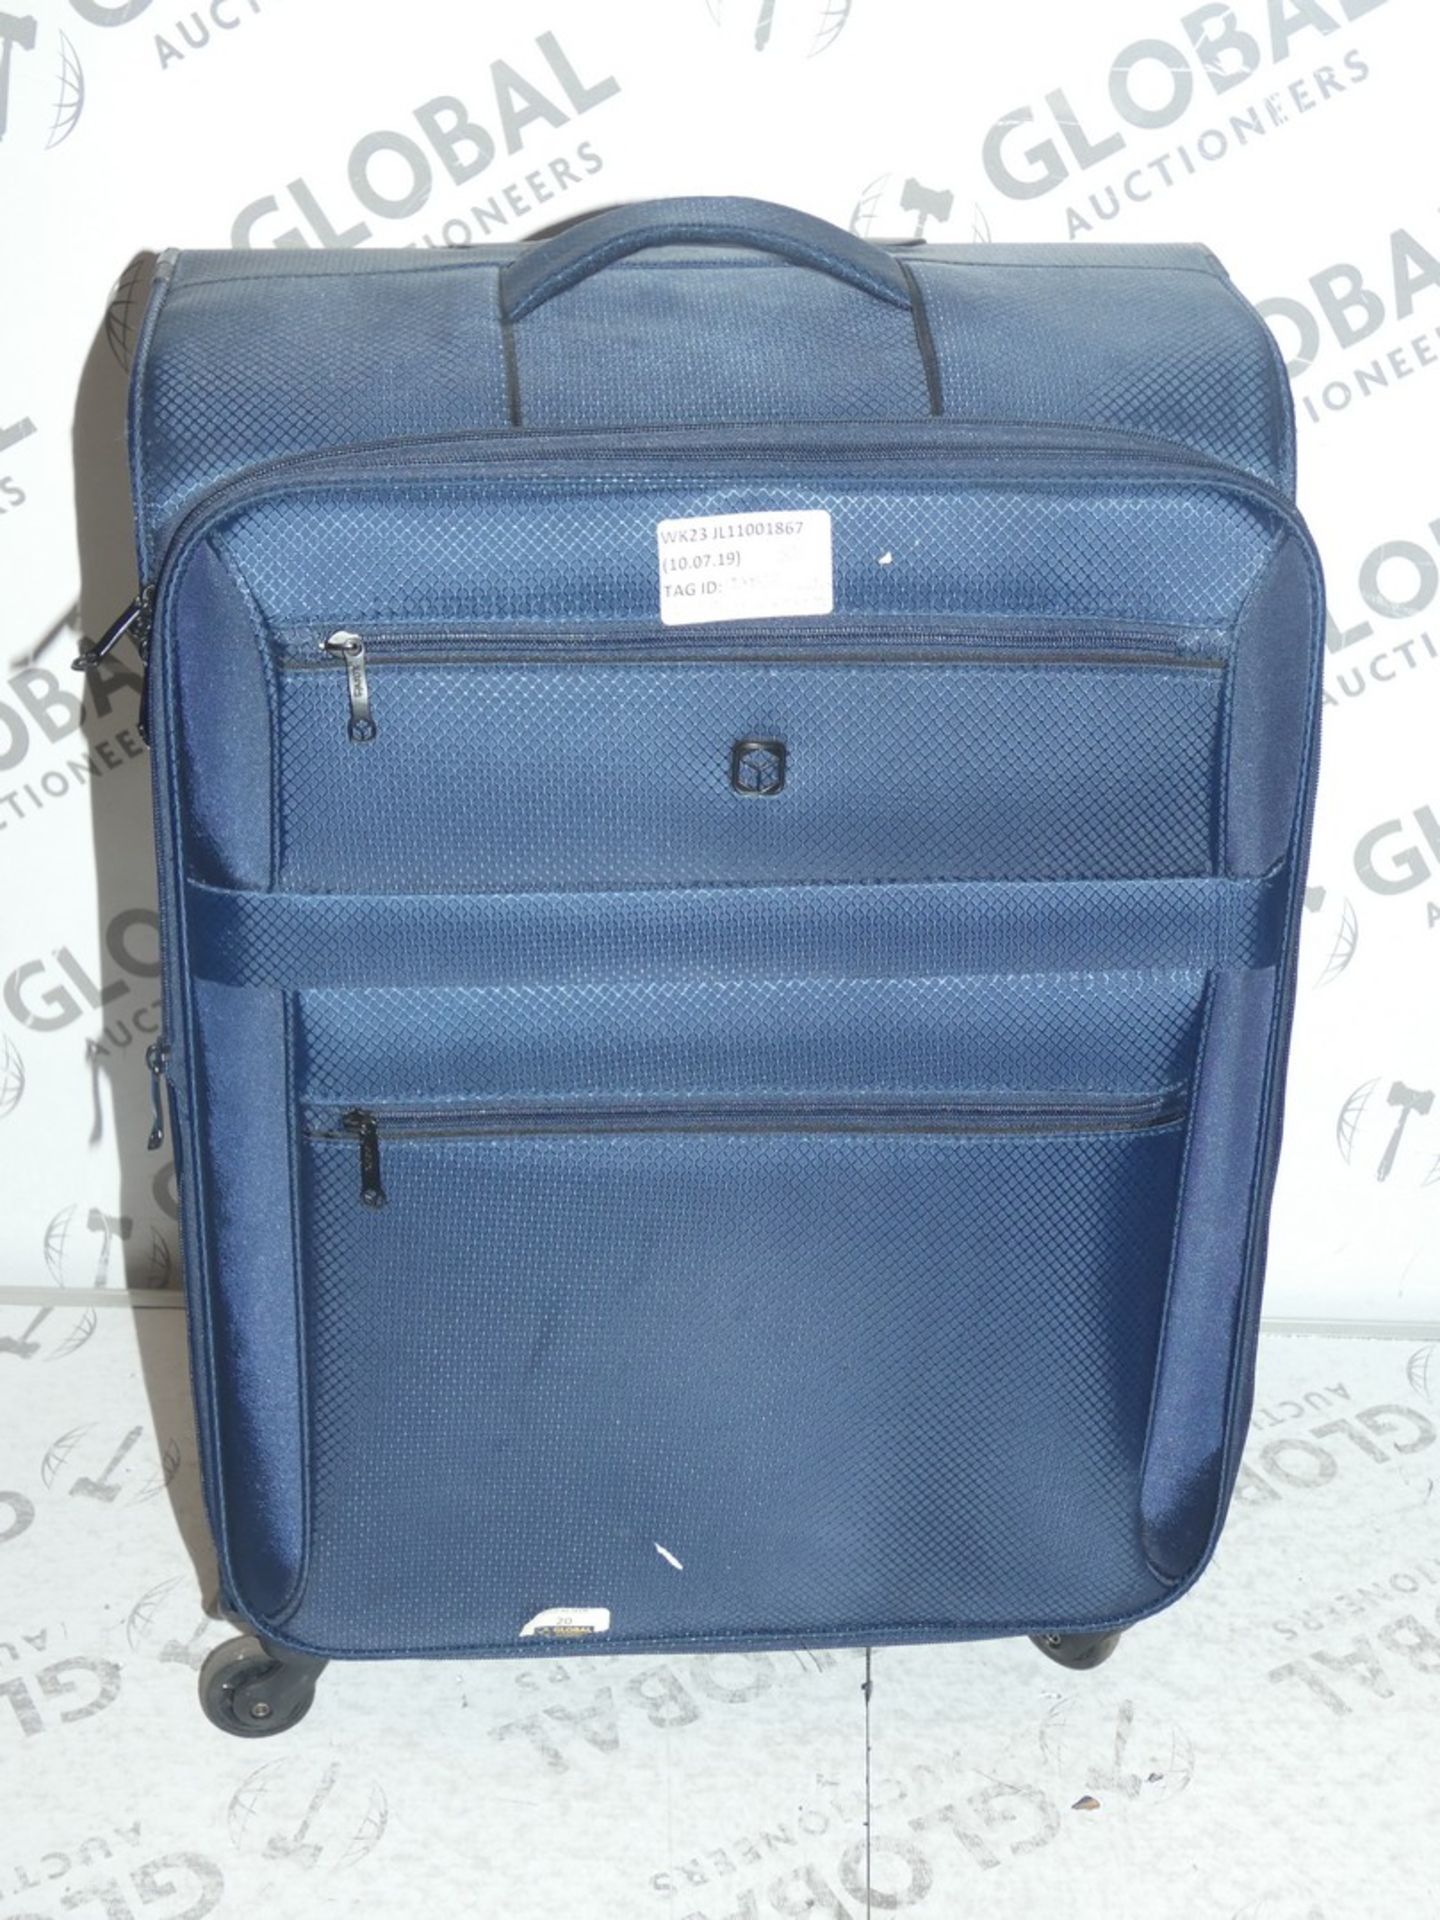 Lot To Contain Qube Decimal Four Wheel Spinner Suitcase RRP£30.0(1700523)(Viewings And Appraisals